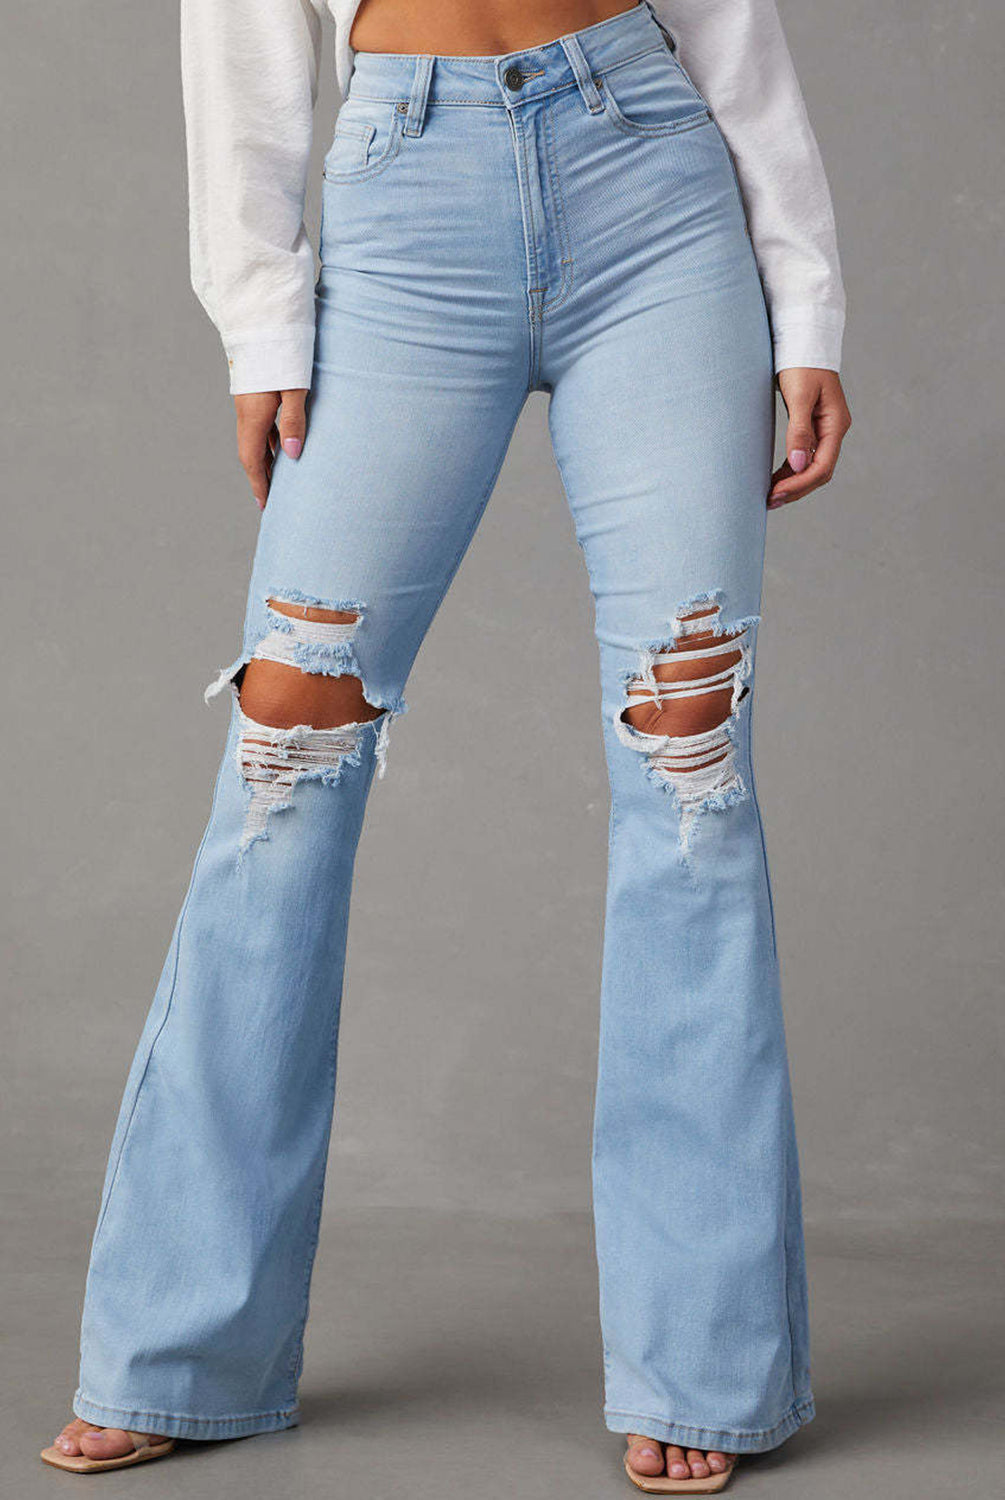 Distressed Bootcut Jeans with Pockets - GemThreads Boutique Distressed Bootcut Jeans with Pockets